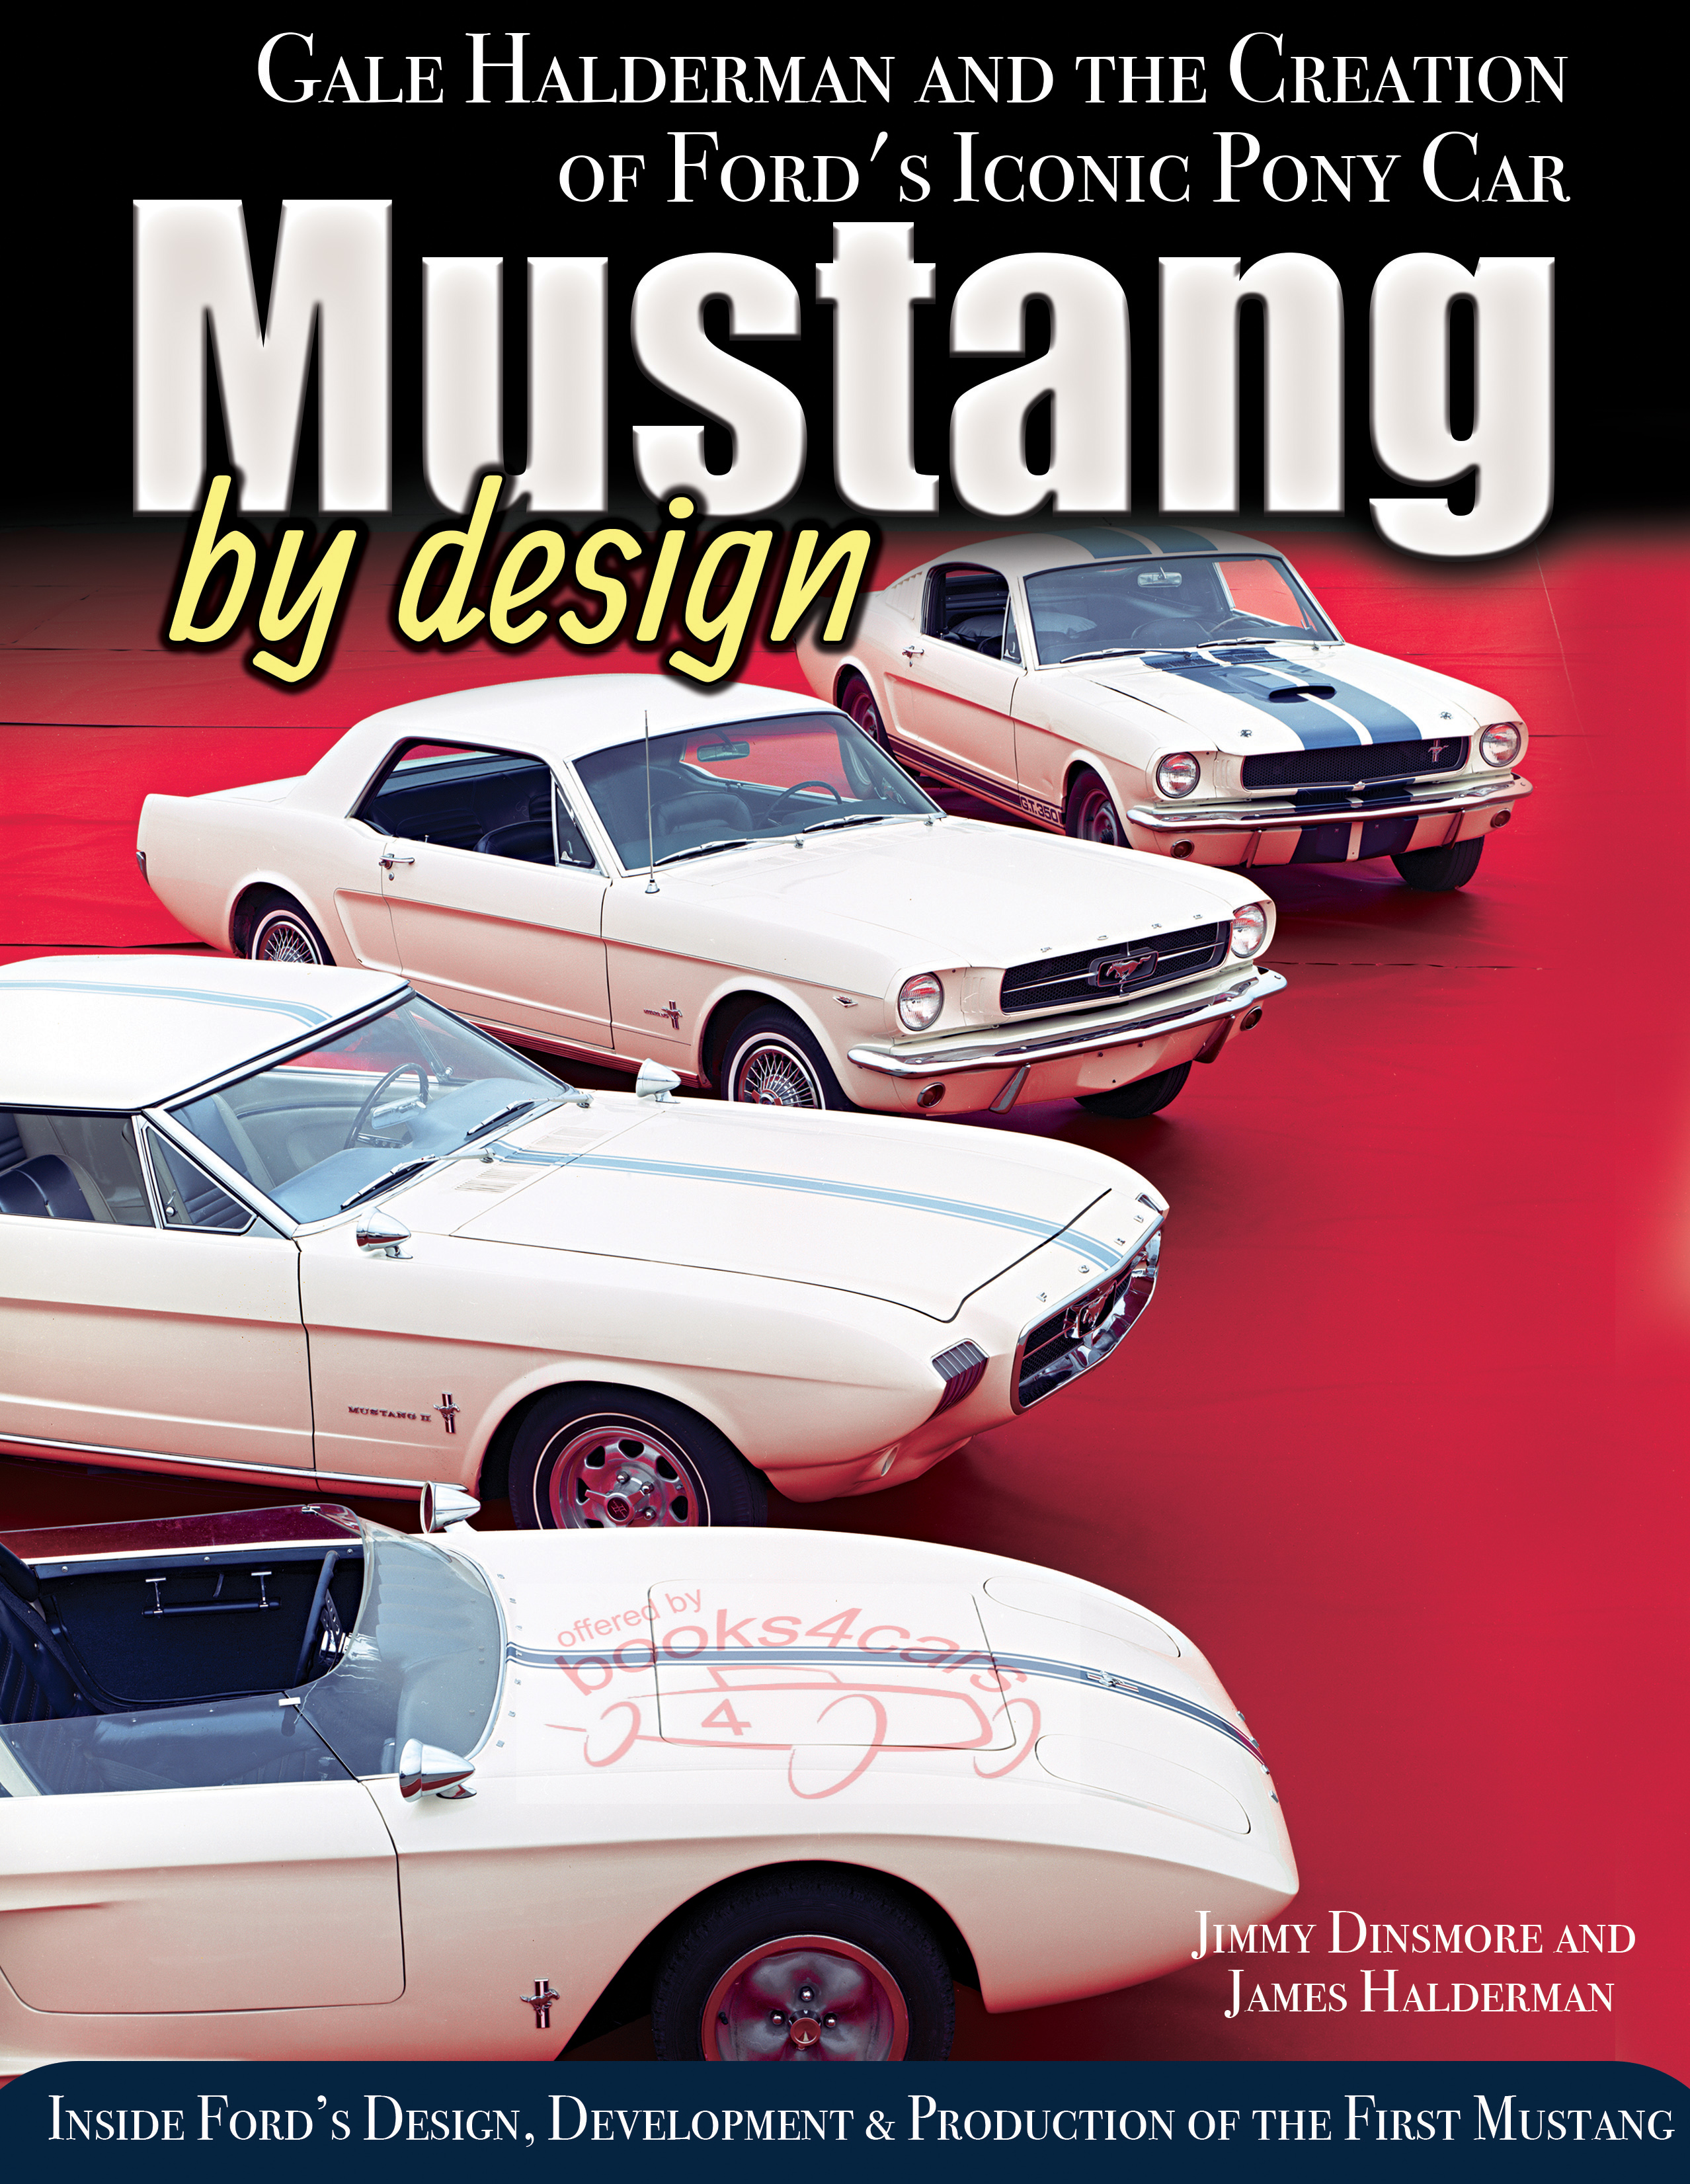 Mustang by Design 176 page Hardcover by Dinsmore & Halderman with over 350 photos